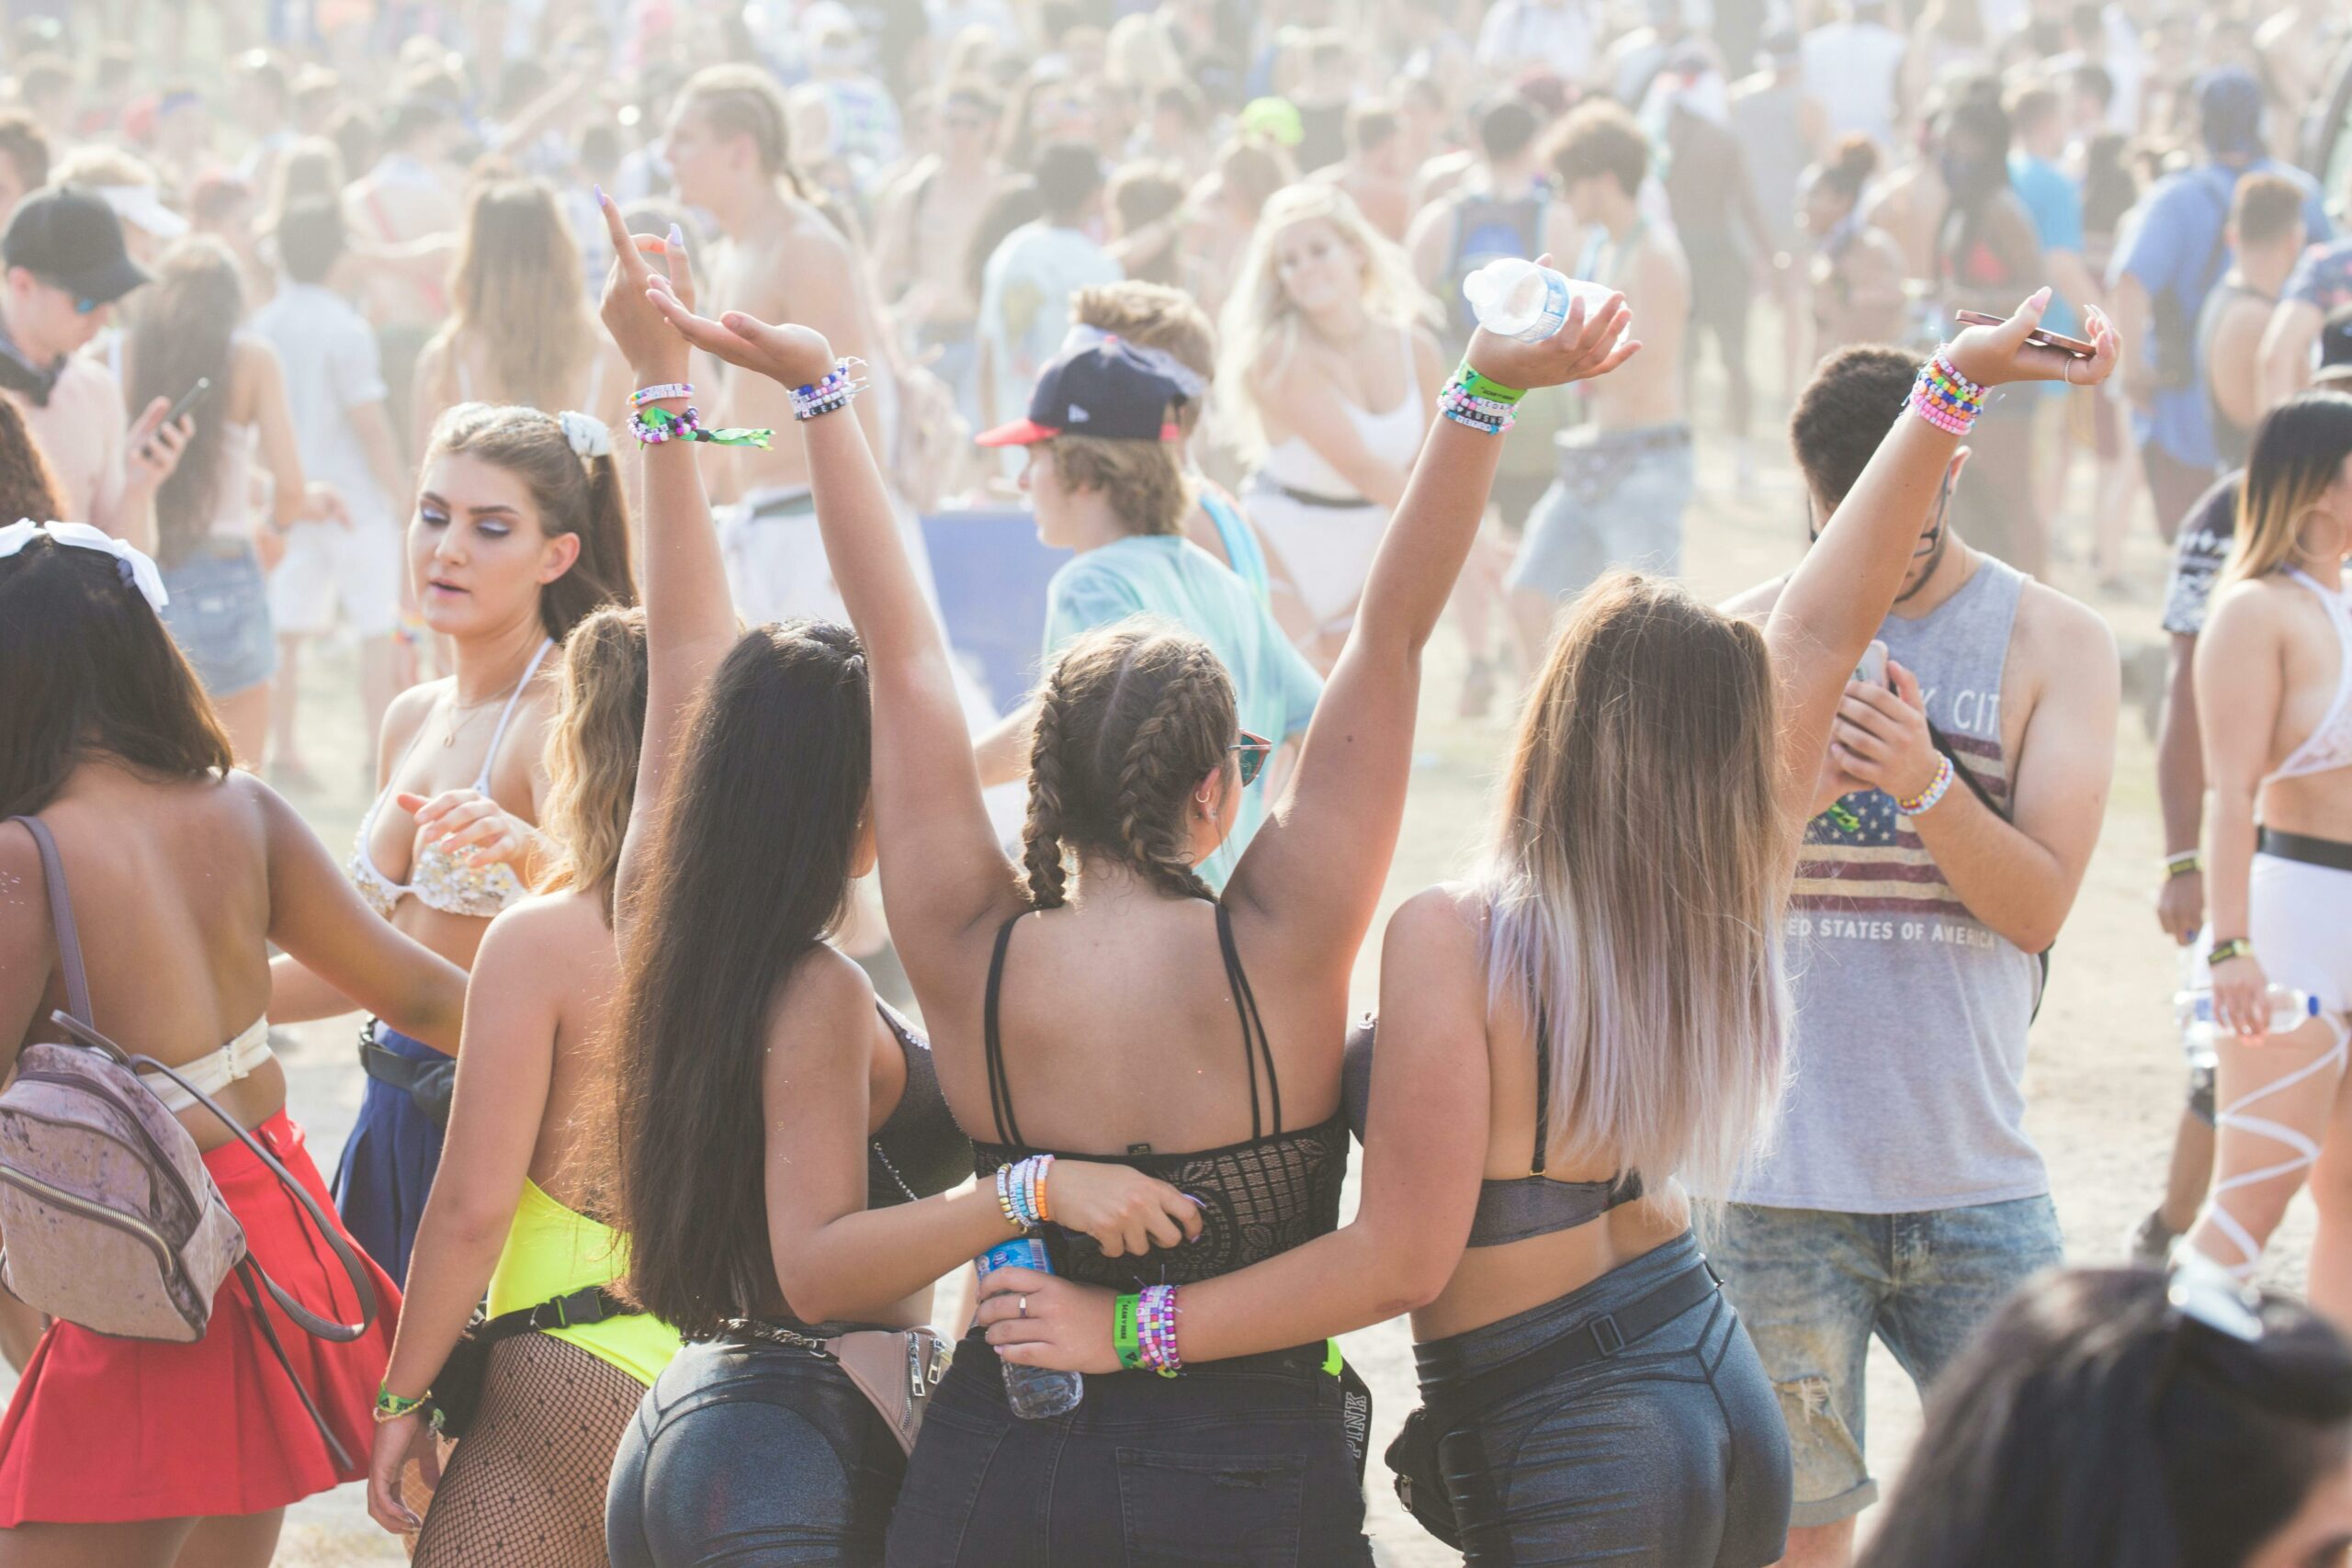 Festival with friends : survival tips